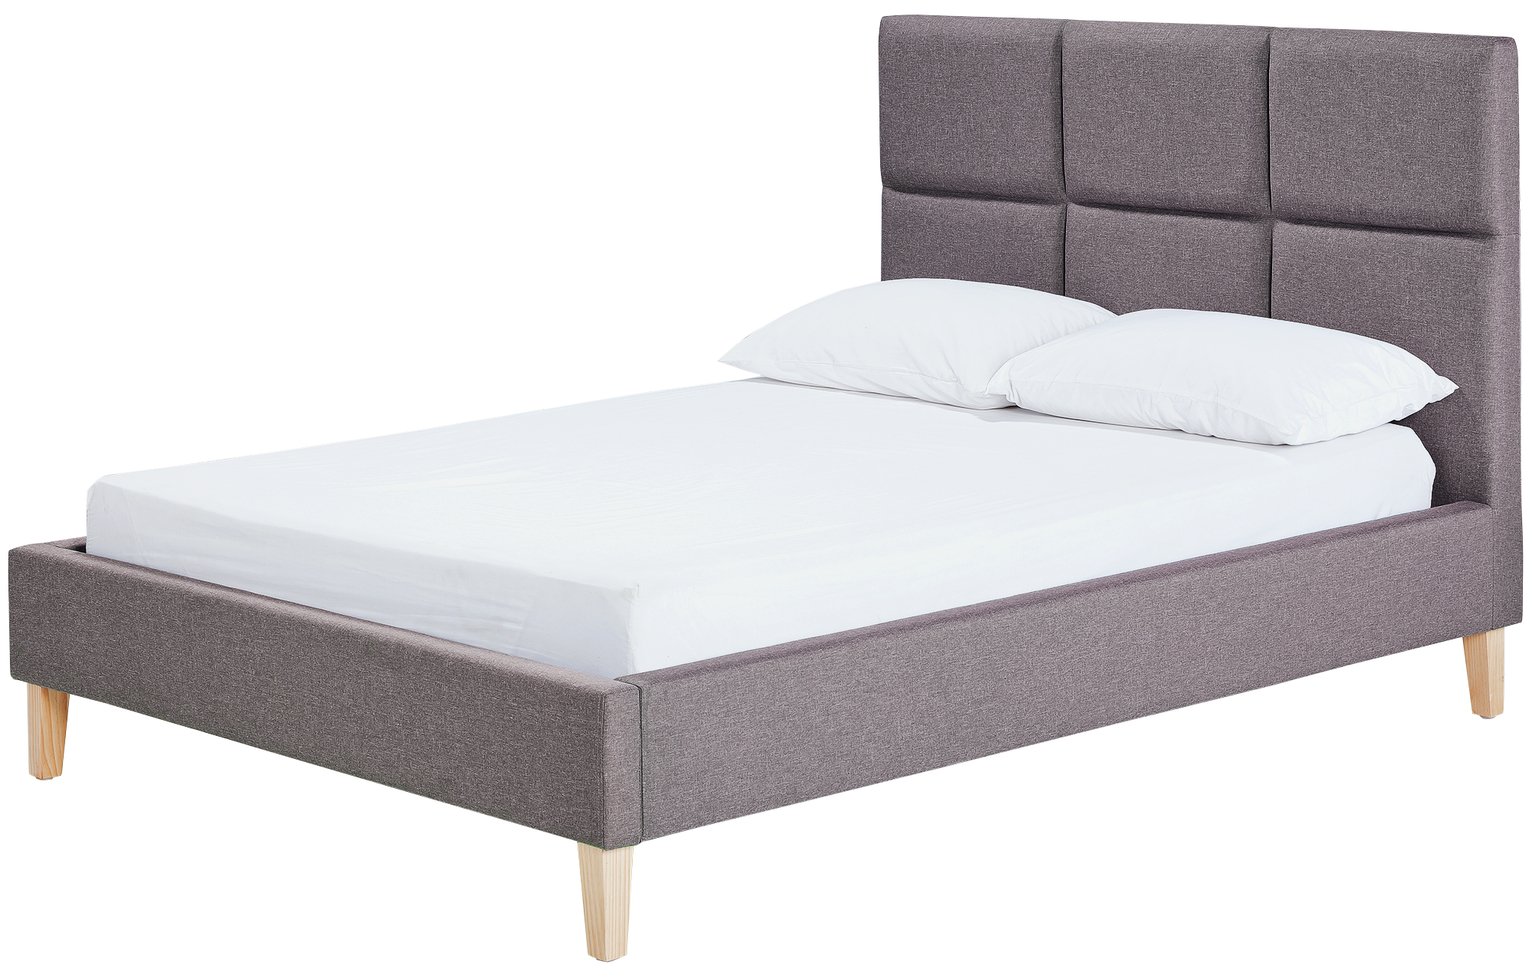 Argos Home Alonso Double Bed Frame - Grey